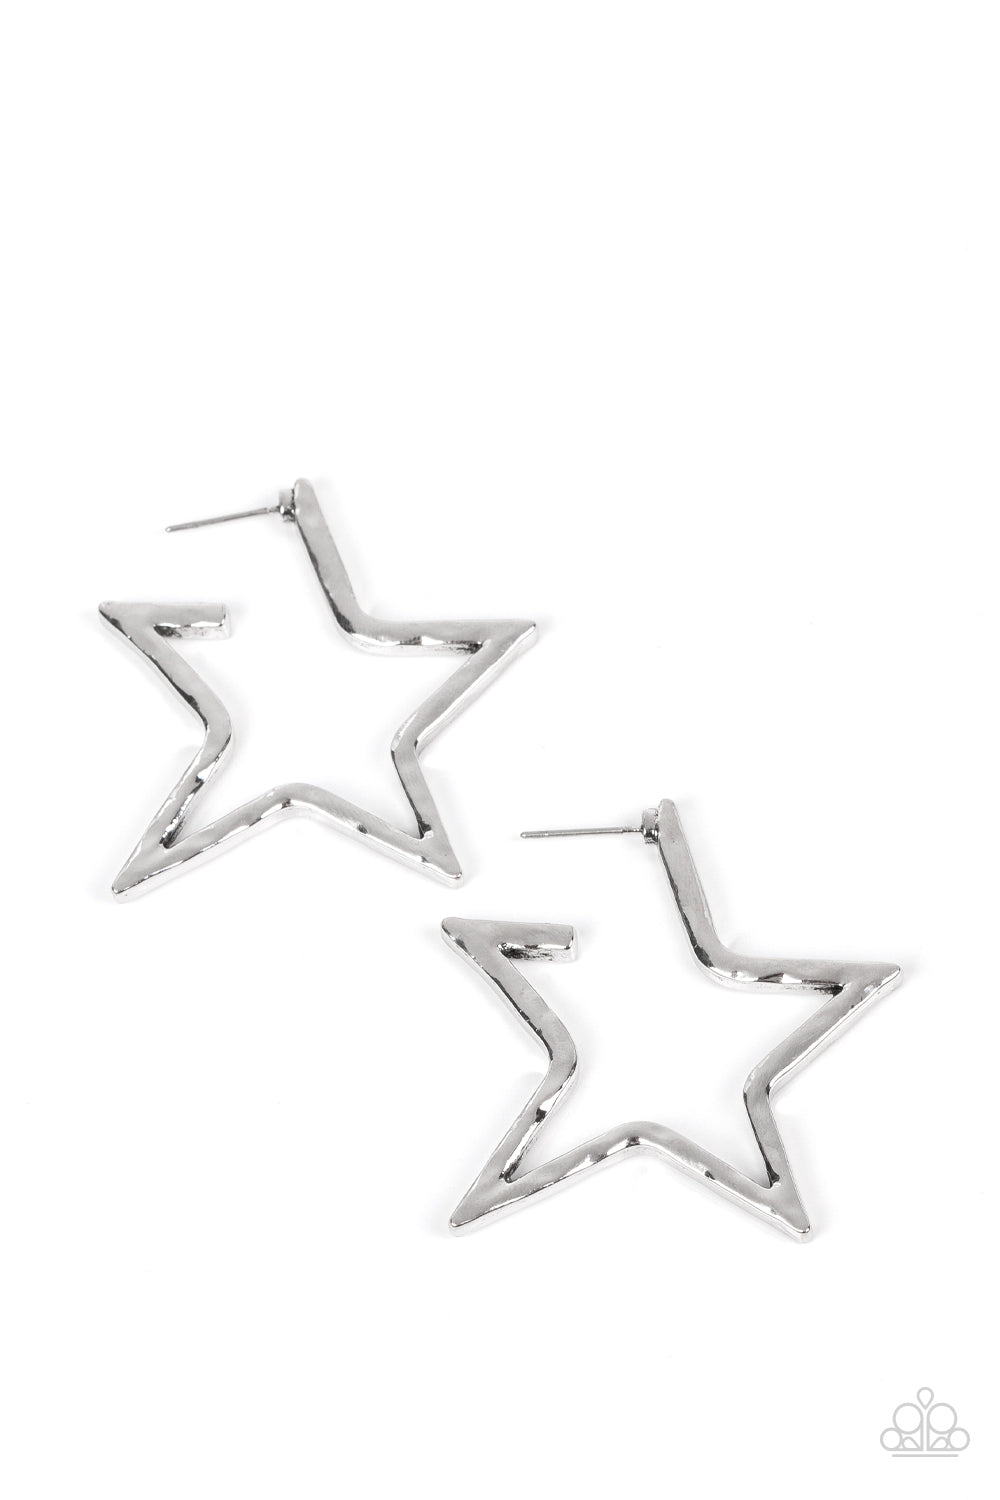 A hammered silver bar delicately folds into a star-shaped hoop, resulting in a stellar metallic shimmer. Earring attaches to a standard post fitting.  Sold as one pair of hoop earrings.